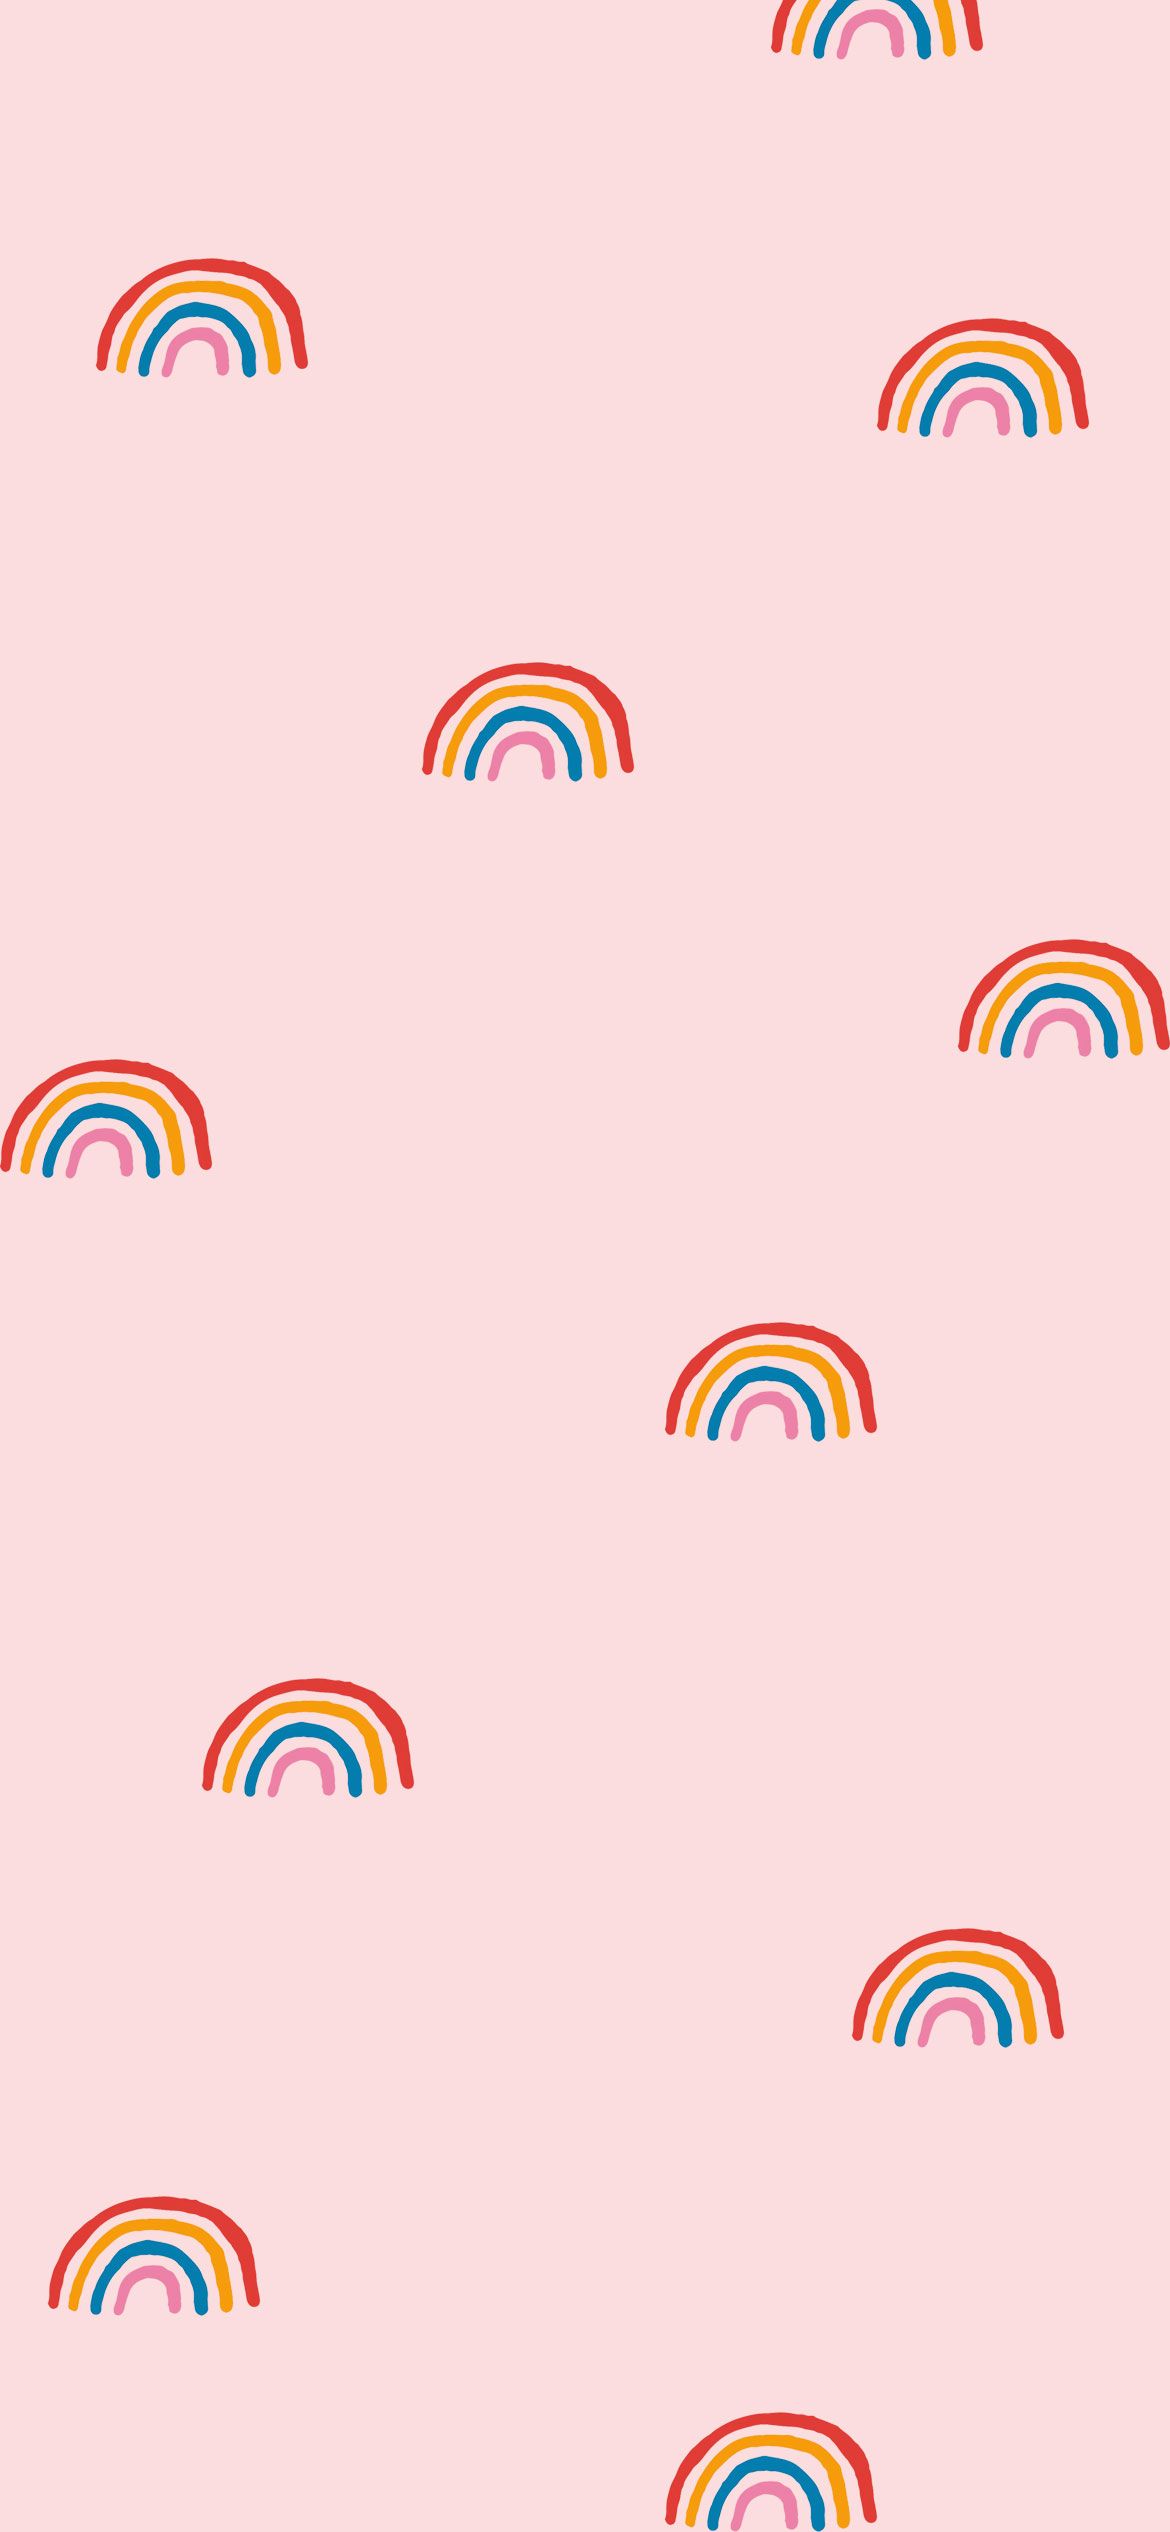 A phone wallpaper with a pattern of rainbows on a pink background - Pink, rainbows